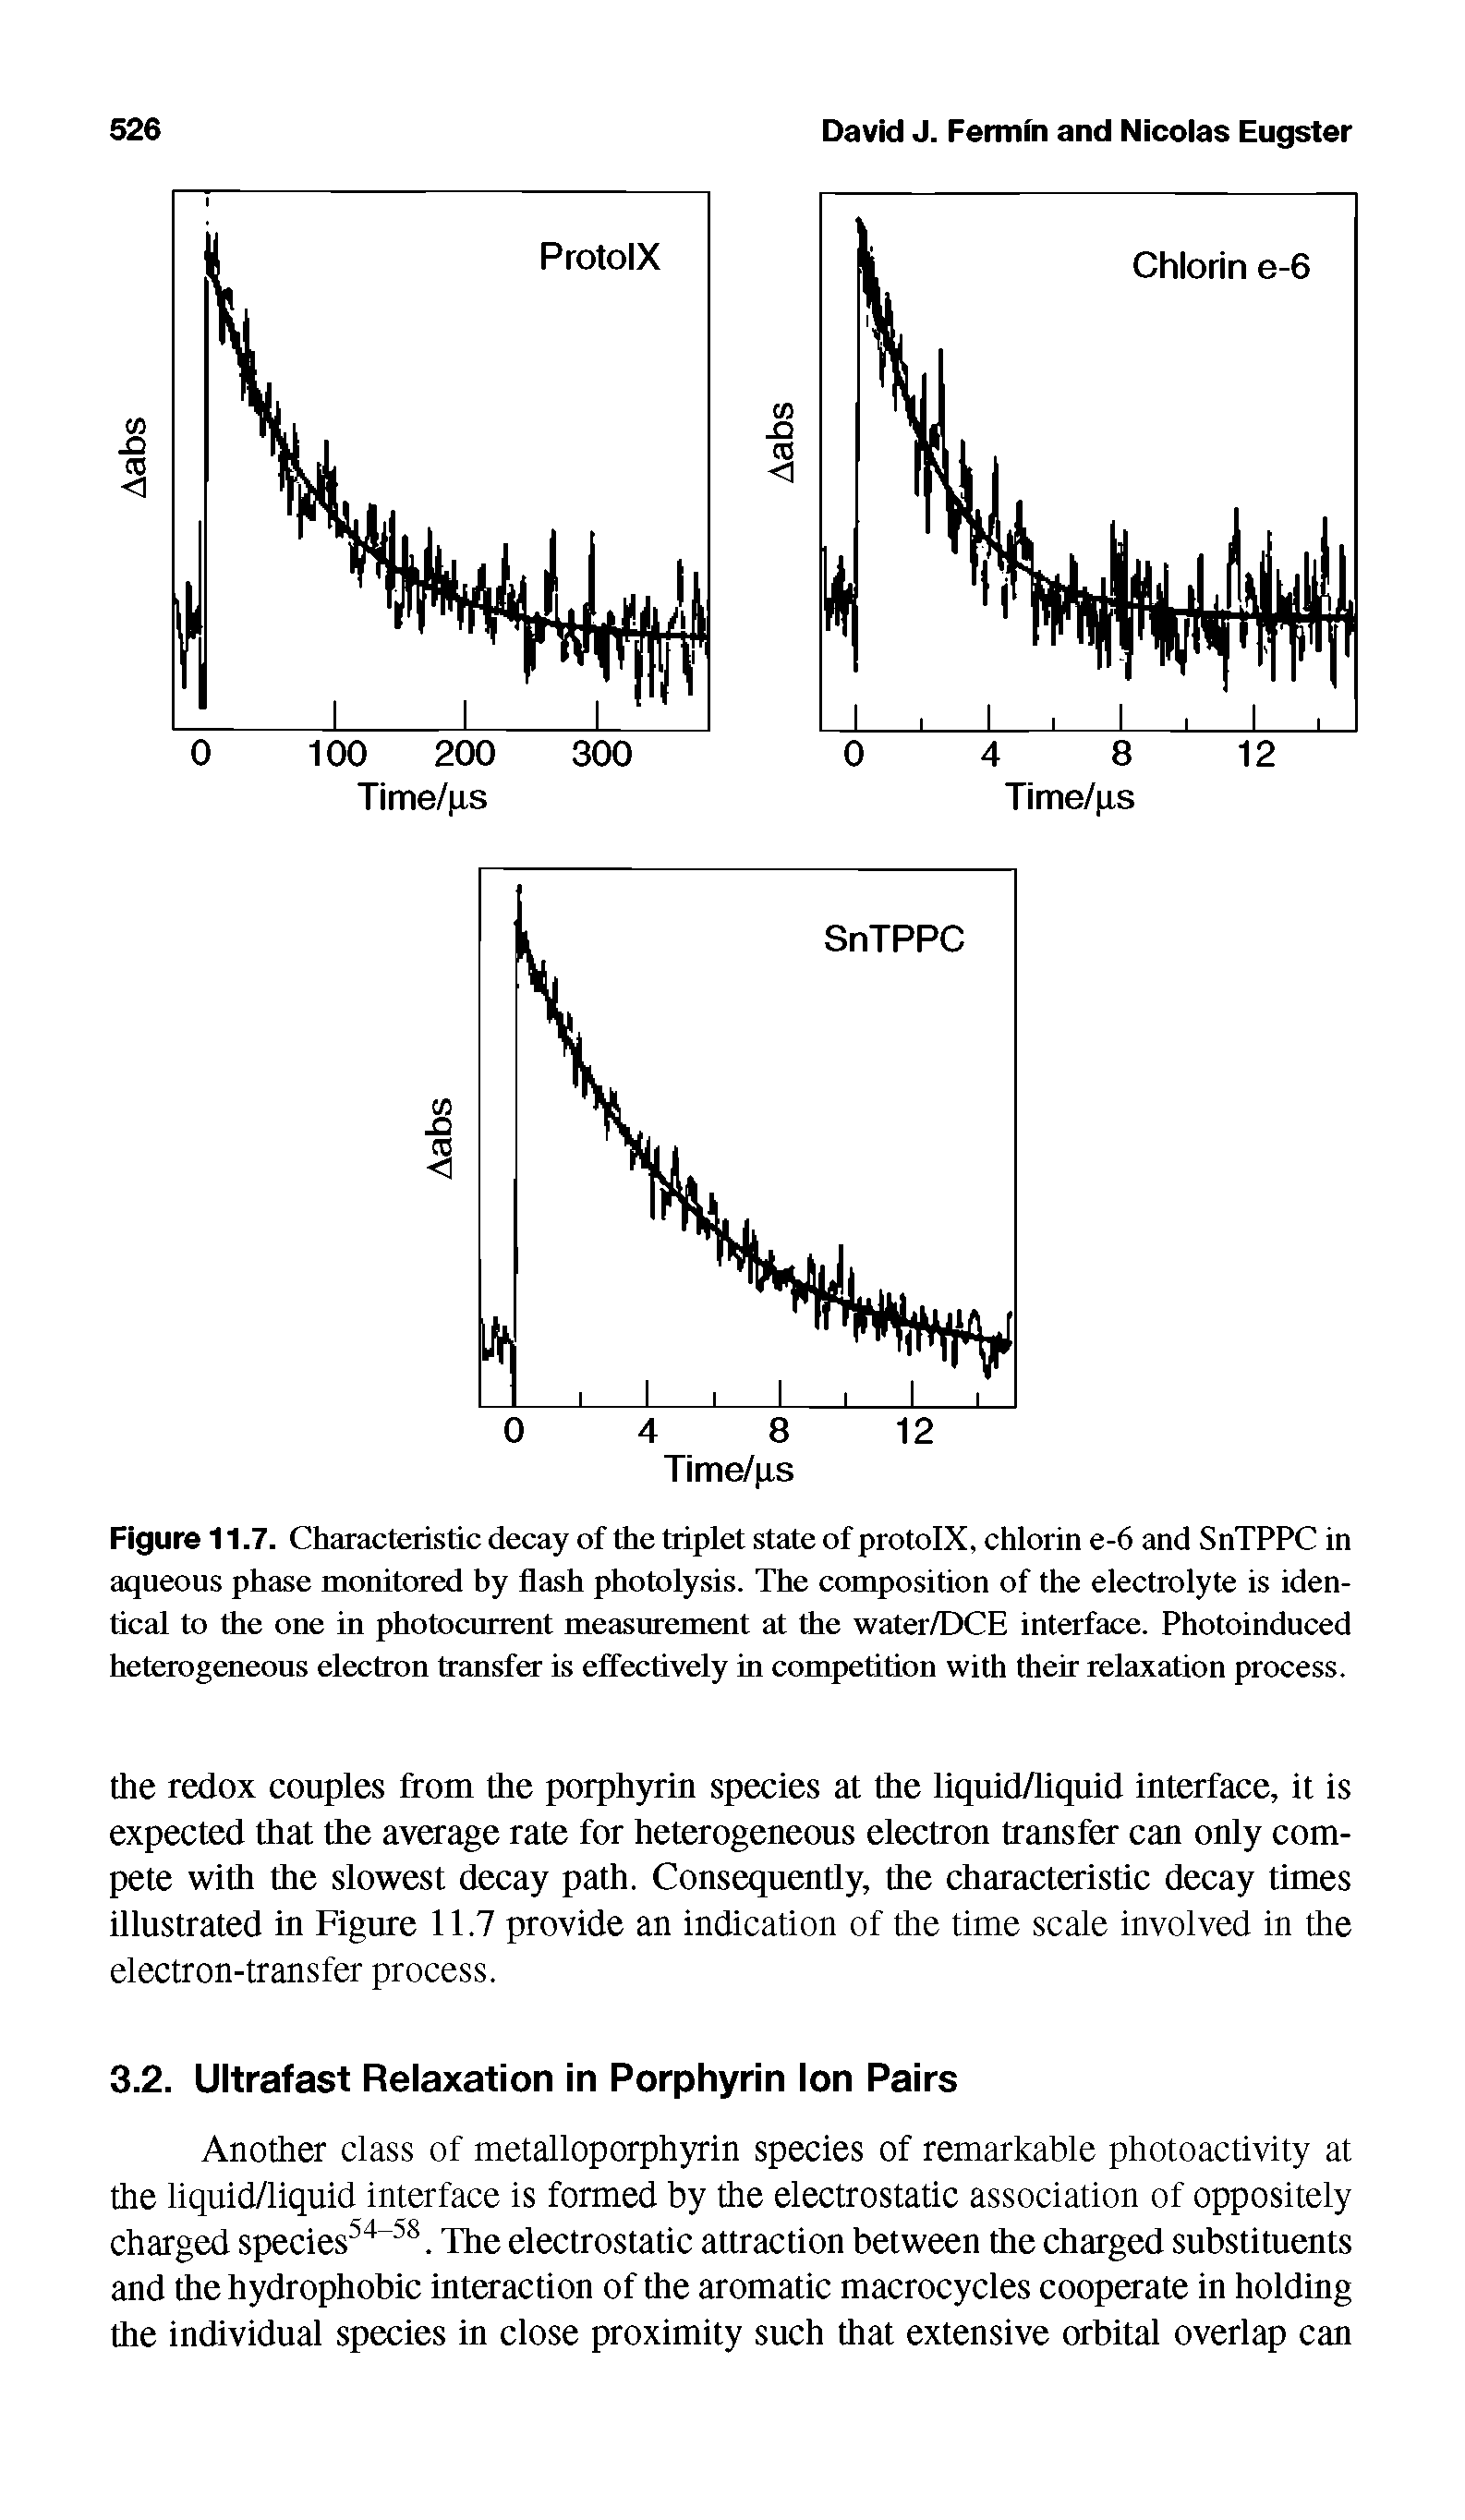 Figure 11.7. Characteristic decay of the triplet state of protoIX, chlorin e-6 and SnTPPC in aqueous phase monitored by flash photolysis. The composition of the electrolyte is identical to the one in photocurrent measurement at the water/DCE interface. Photoinduced heterogeneous electron transfer is effectively in competition with their relaxation process.